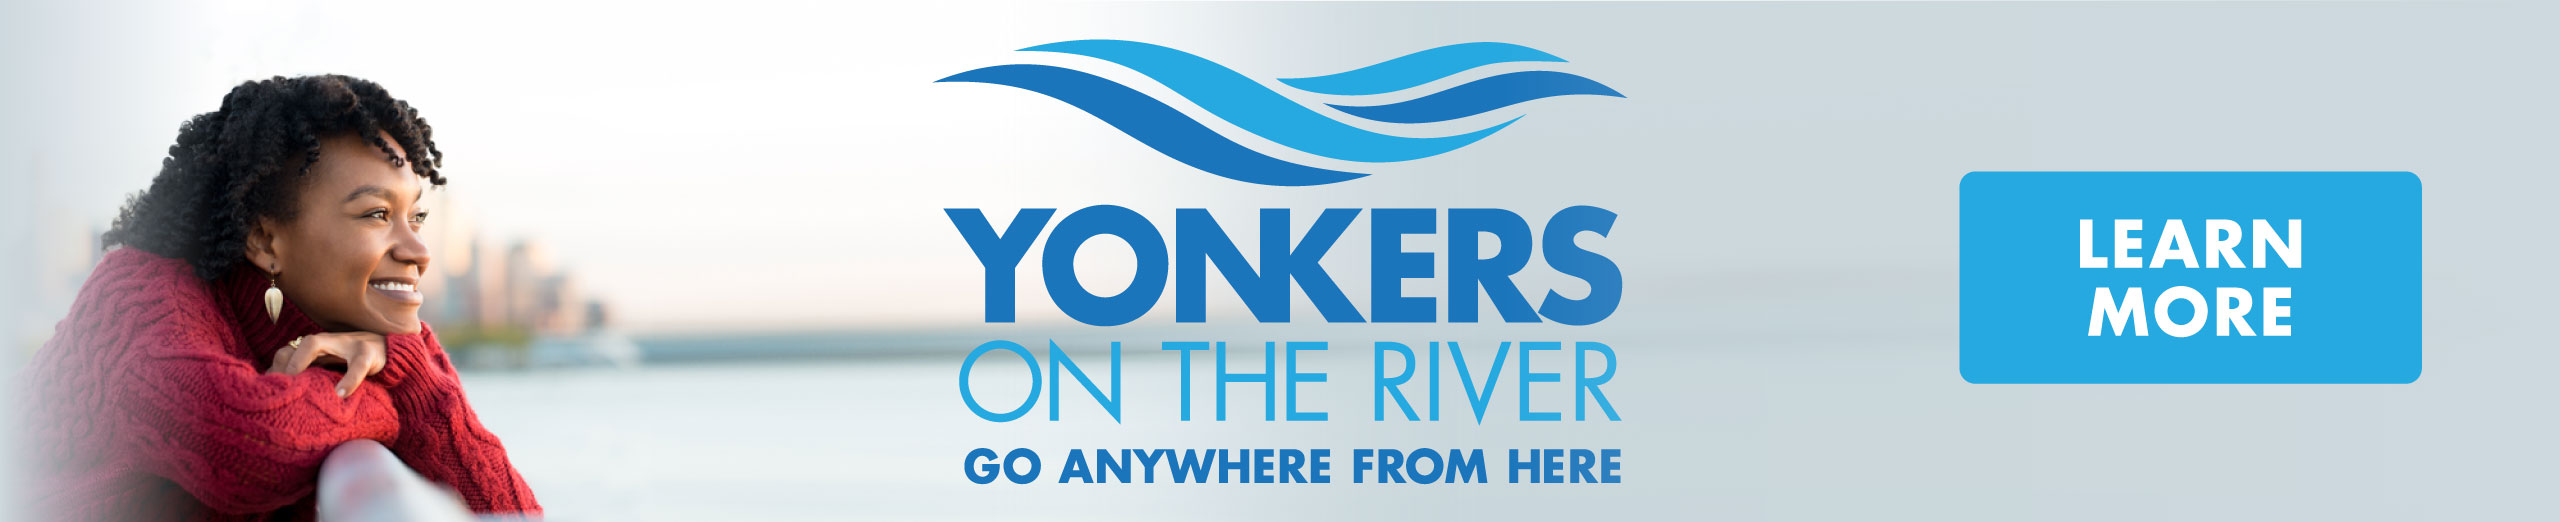 Yonkers on the River